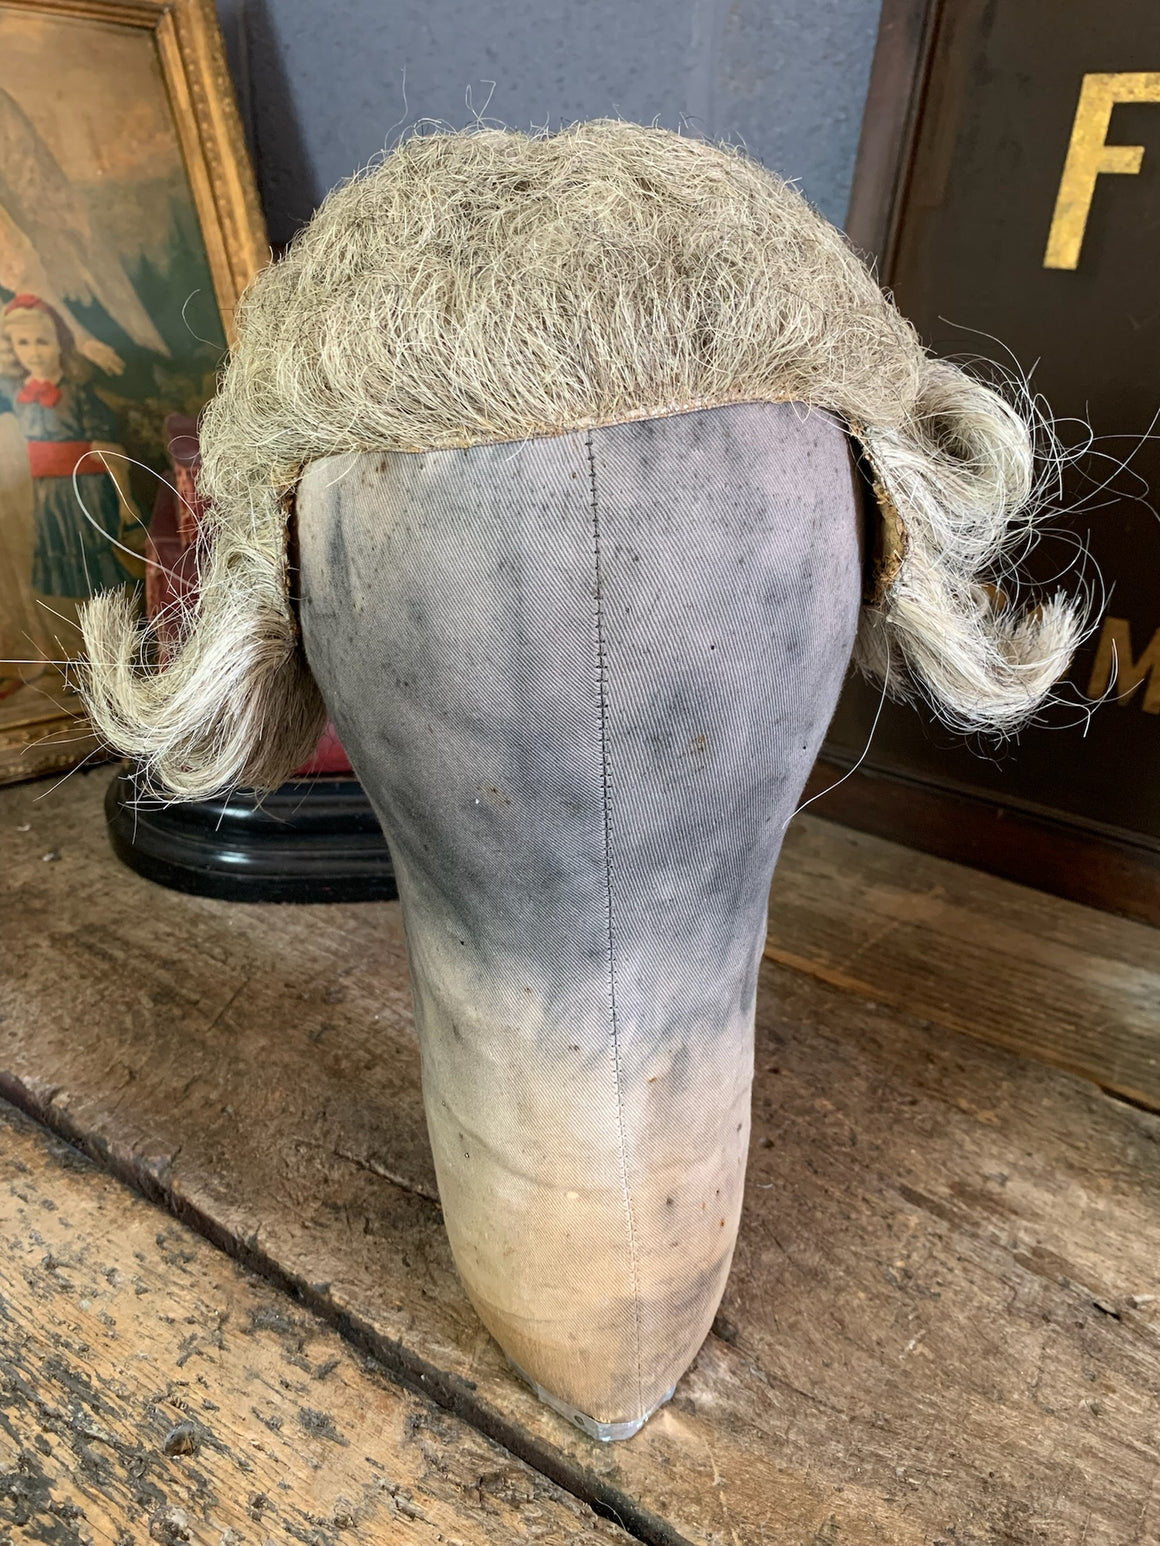 A grey barrister's wig